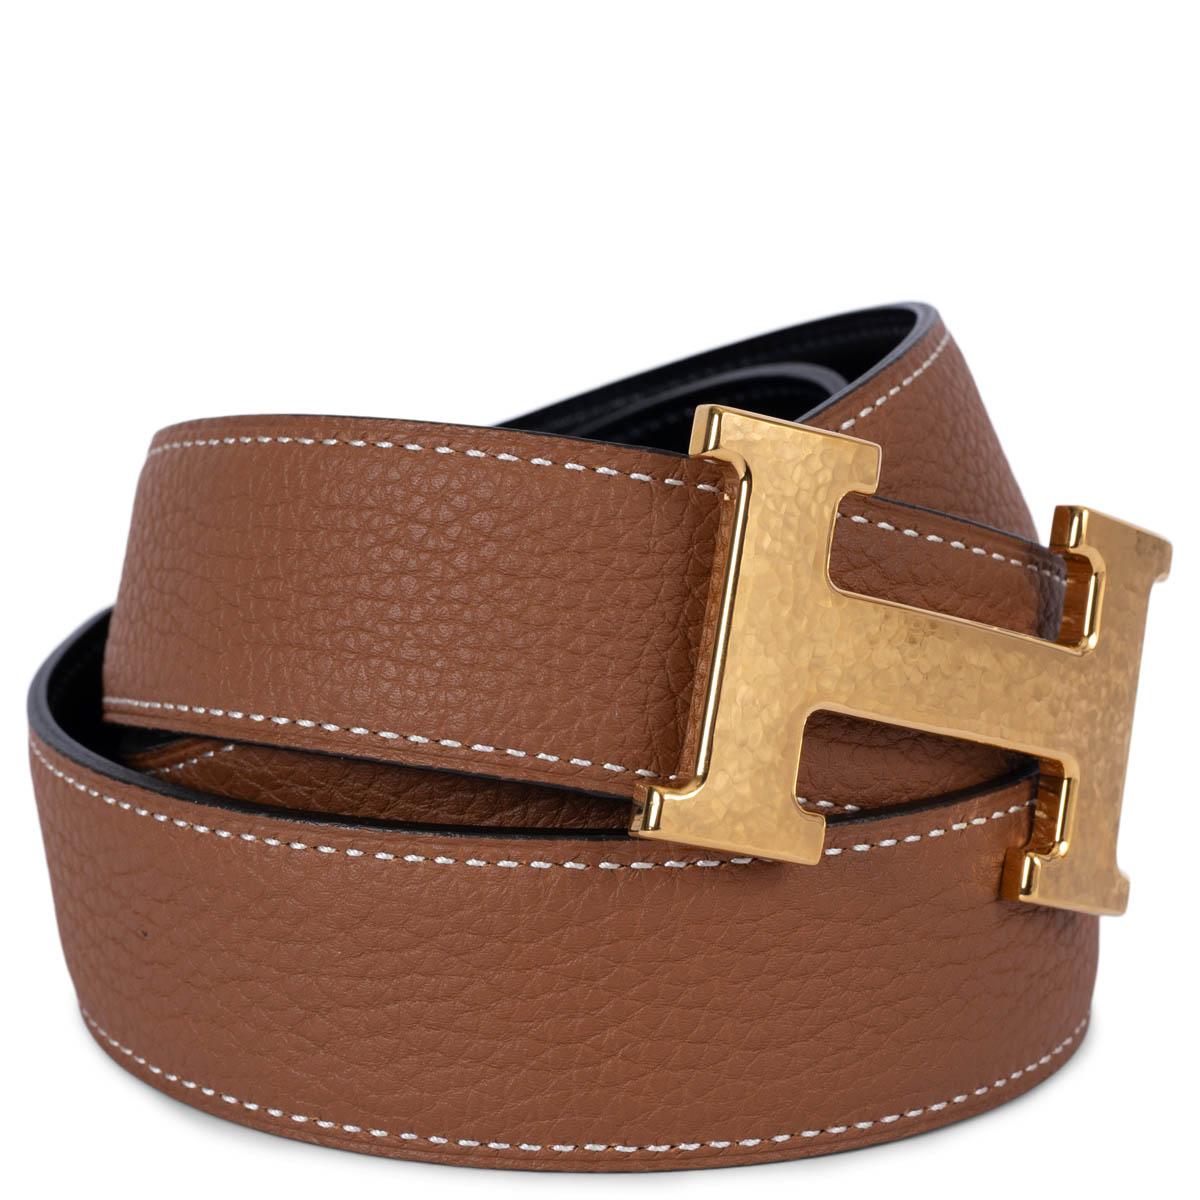 100% authentic Hermès H Martelee reversible belt in black Box leather and Gold (camel) Togo leather with gold-tone hammered buckle. Brand new. Comes with box and dust bag. 

Measurements
Tag Size	90
Width	3.2cm (1.2in)
Fits	87cm (33.9in) to 92cm